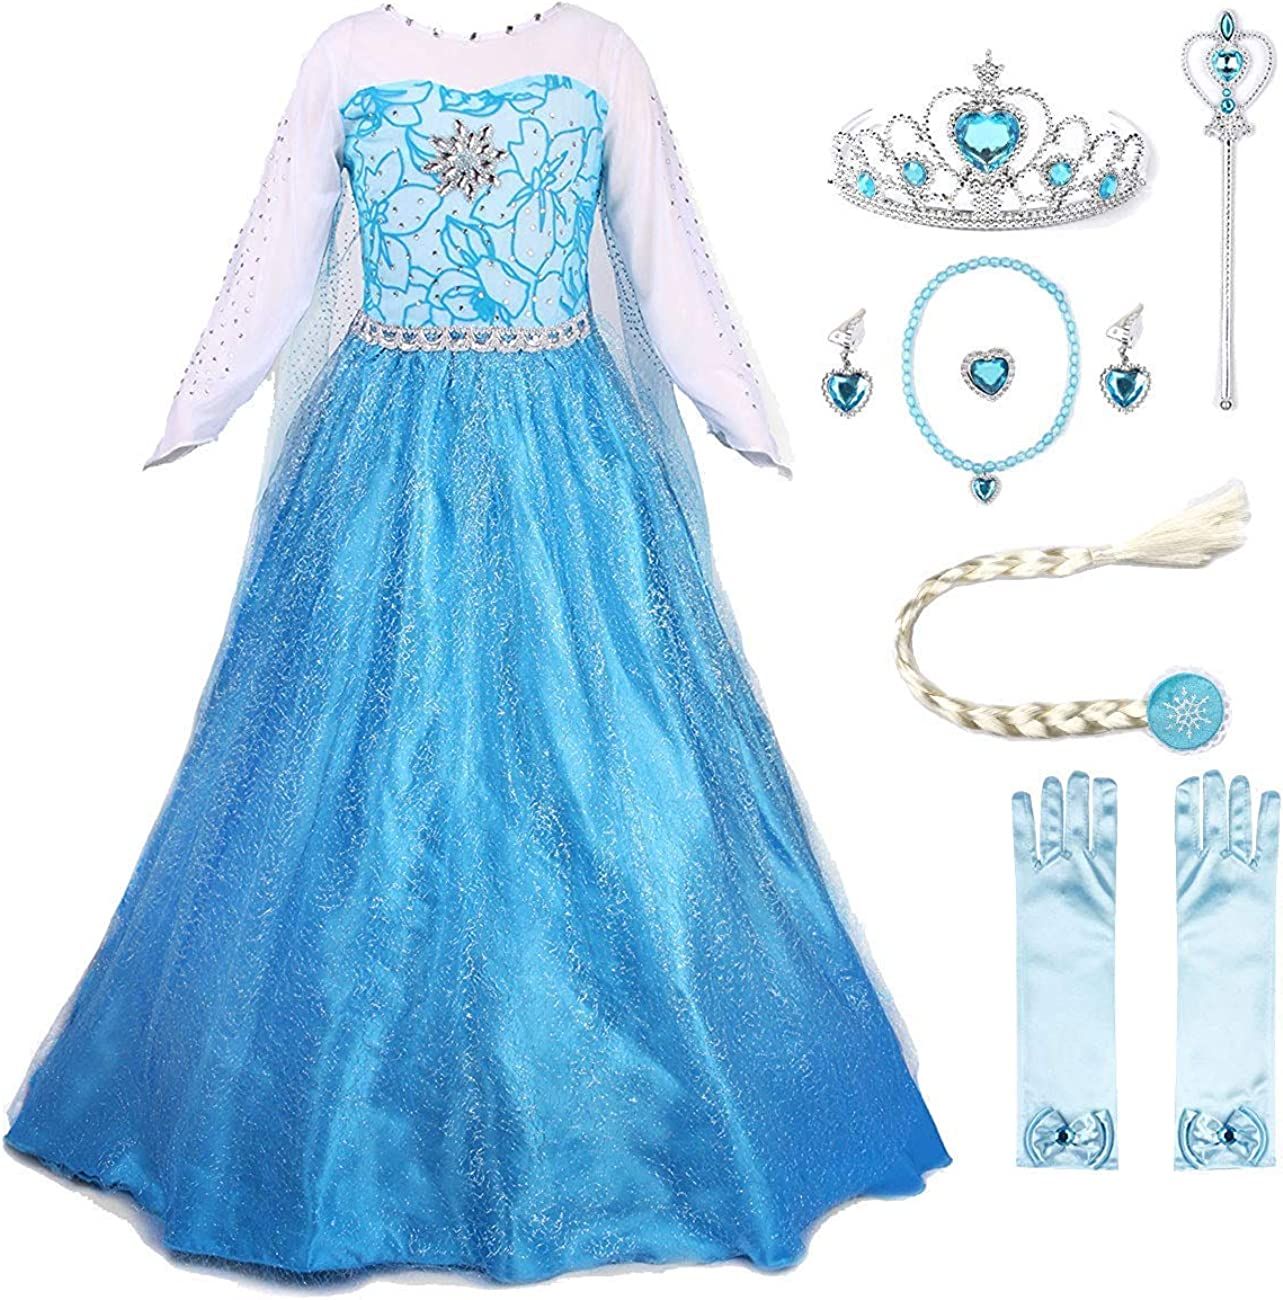 JerrisApparel Princess Dress Queen Costume Cosplay Dress Up with Accessories | Amazon (US)